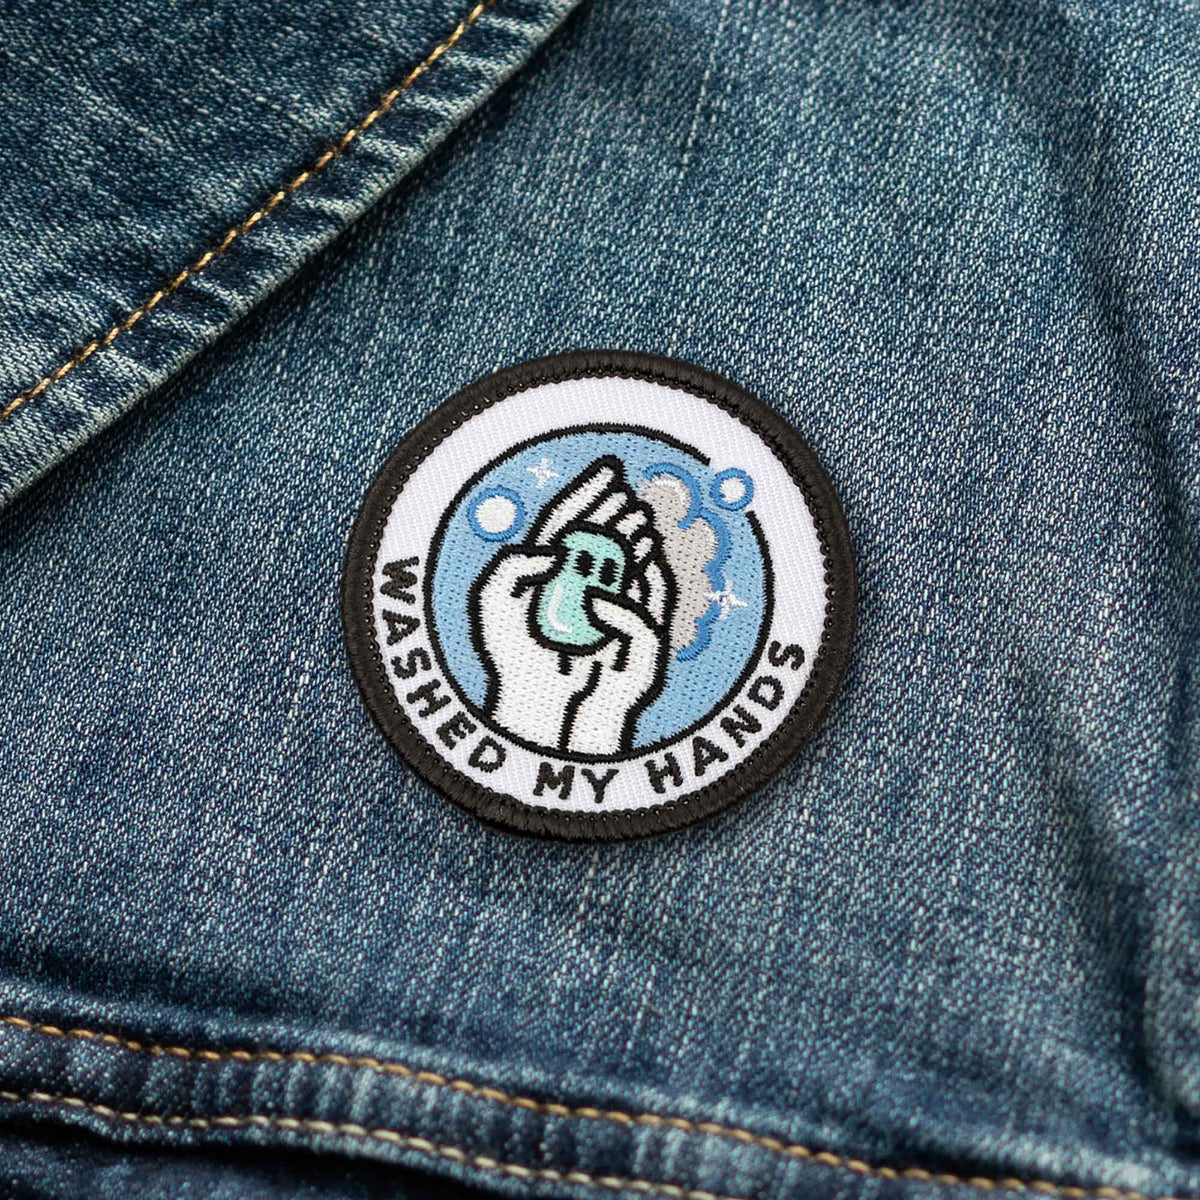 Washed My Hands individual adulting merit badge patch for adults on denim jacket